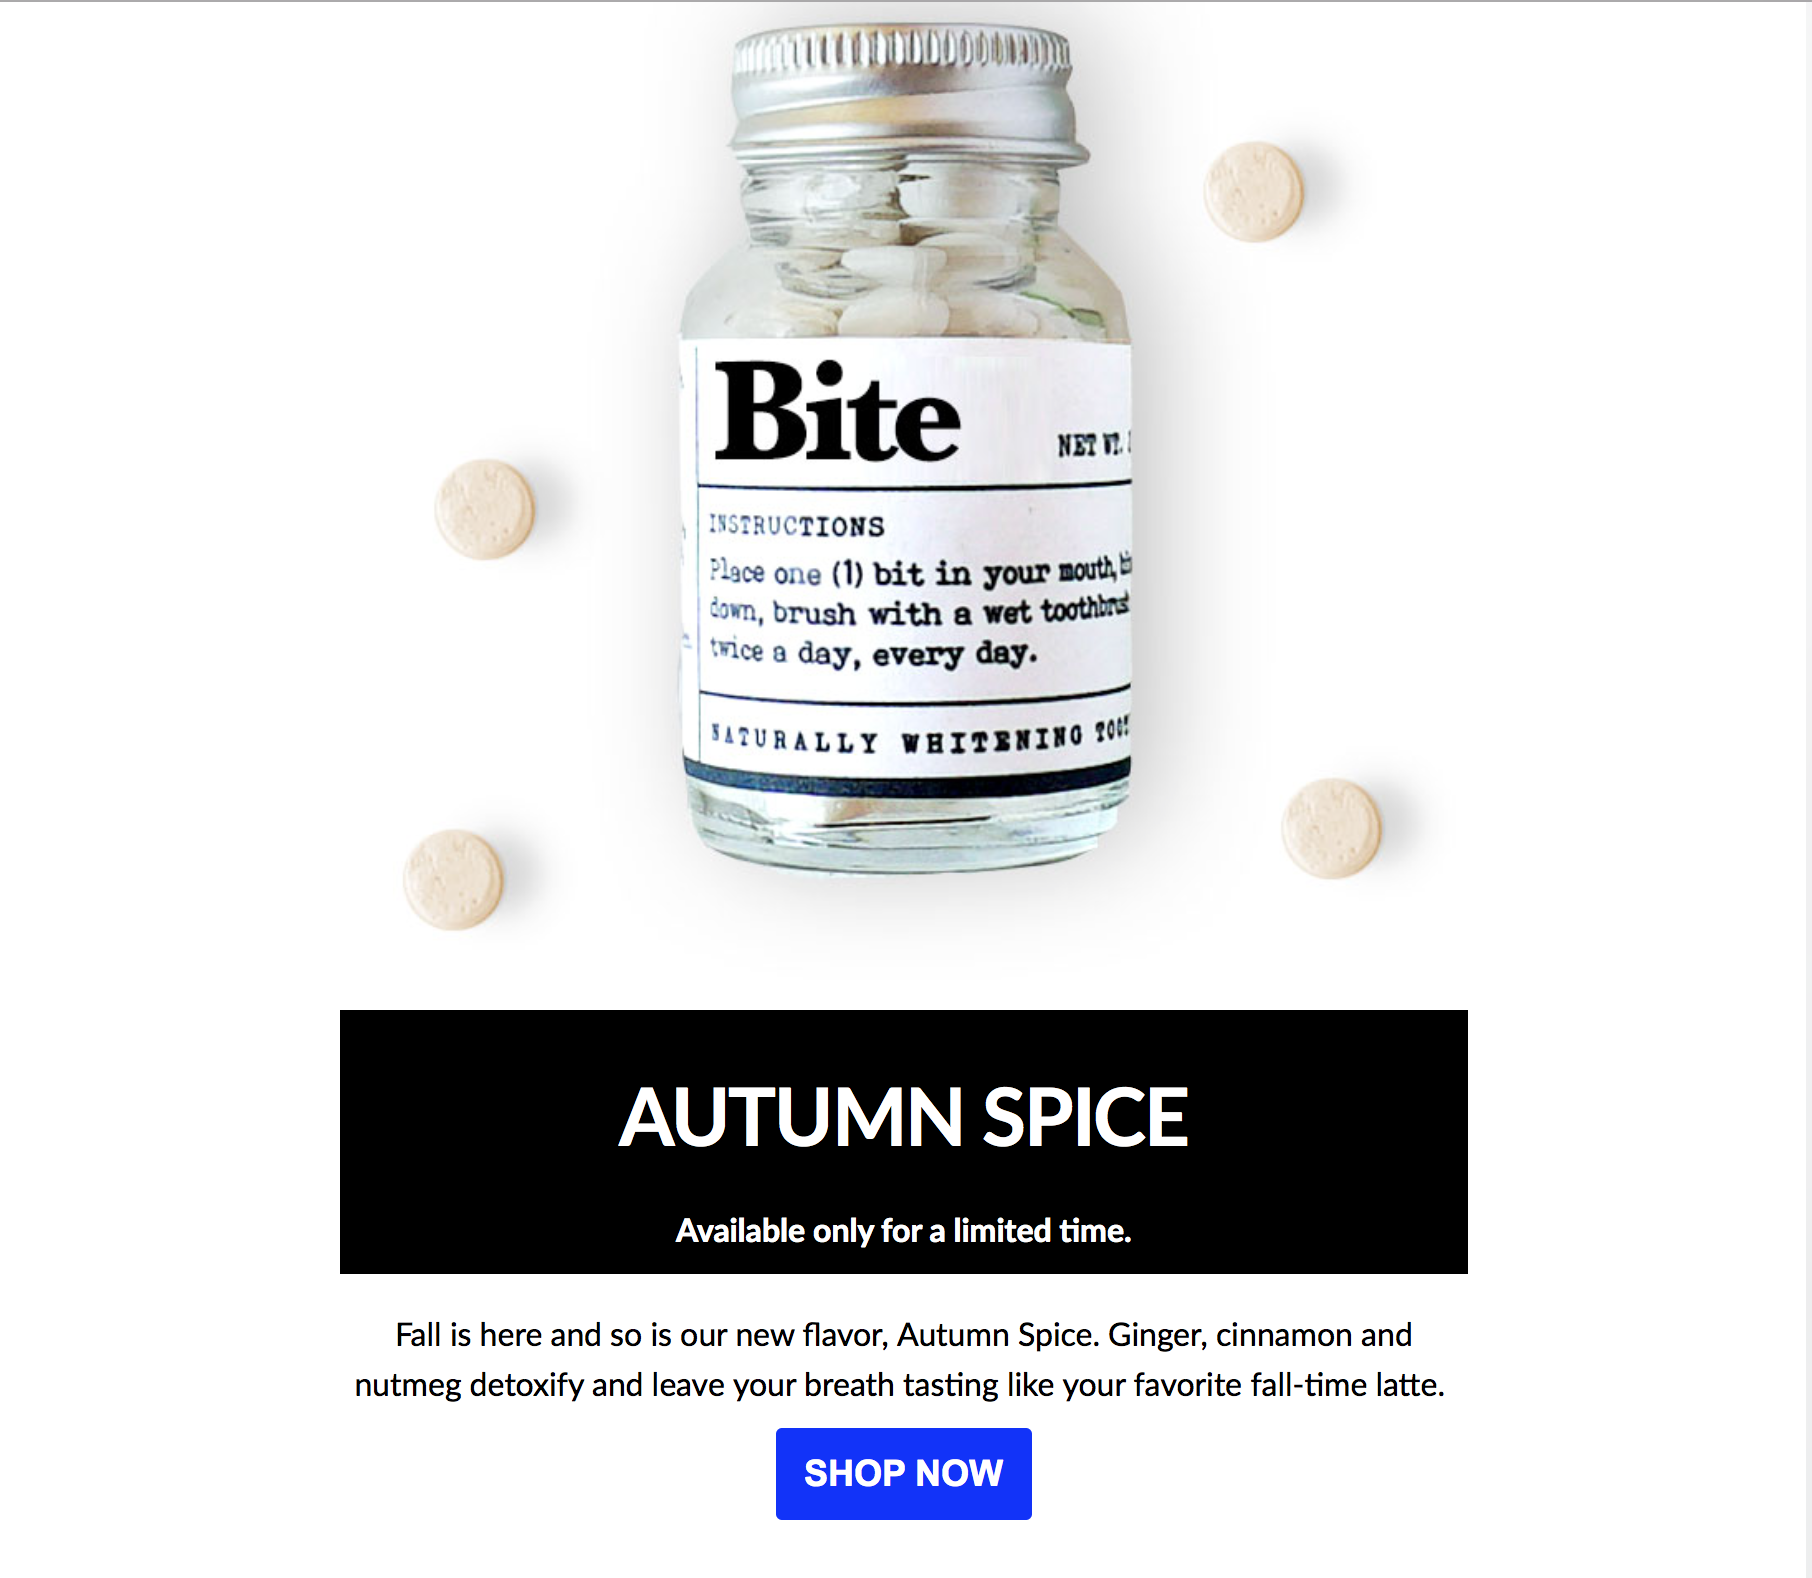 Screenshot showing a product called Autumn Spice